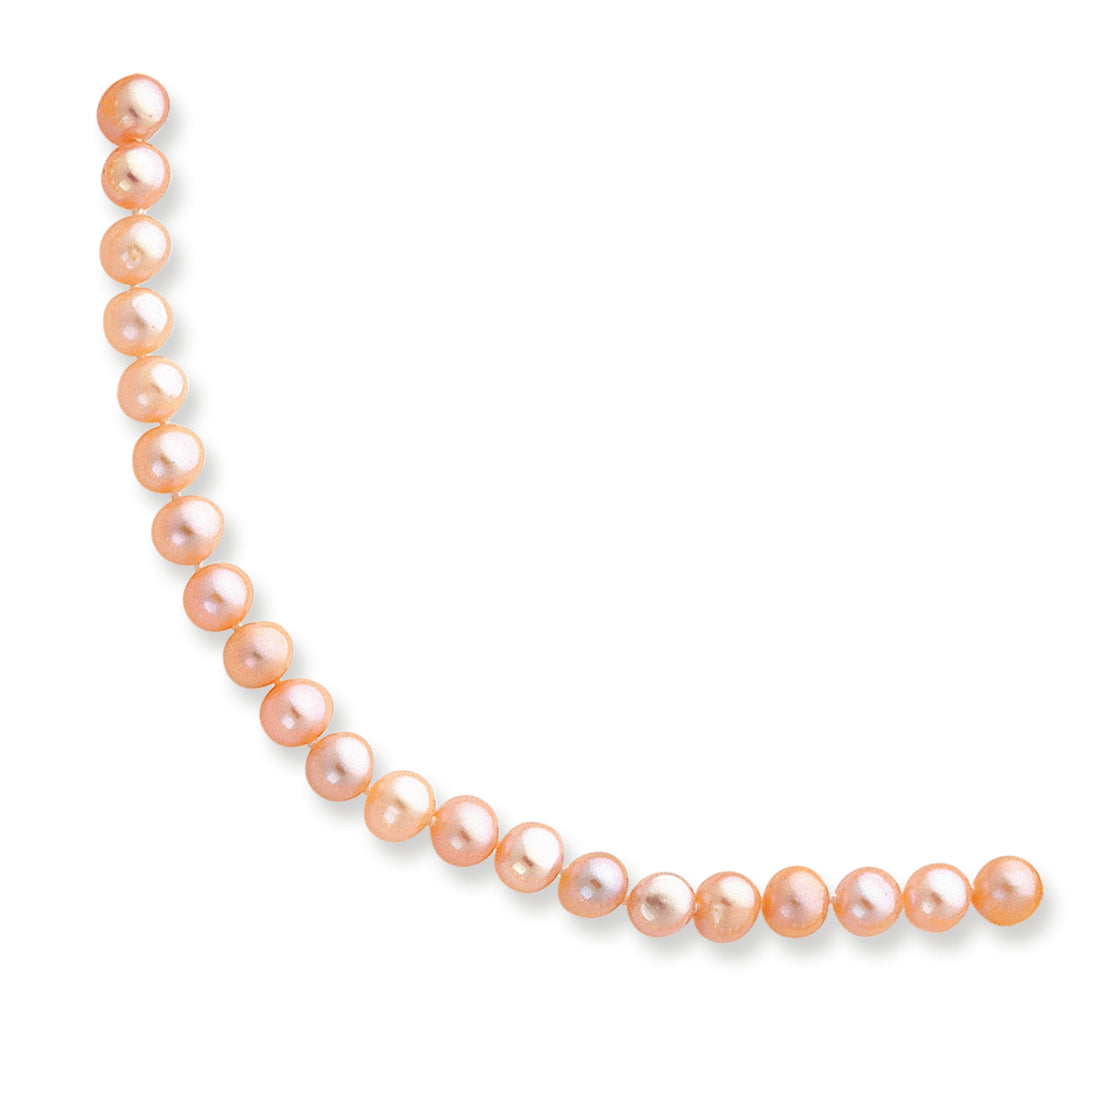 14K Gold 5.5-6mm Pink Freshwater Onion Cultured Pearl Bracelet 7.5 Inches